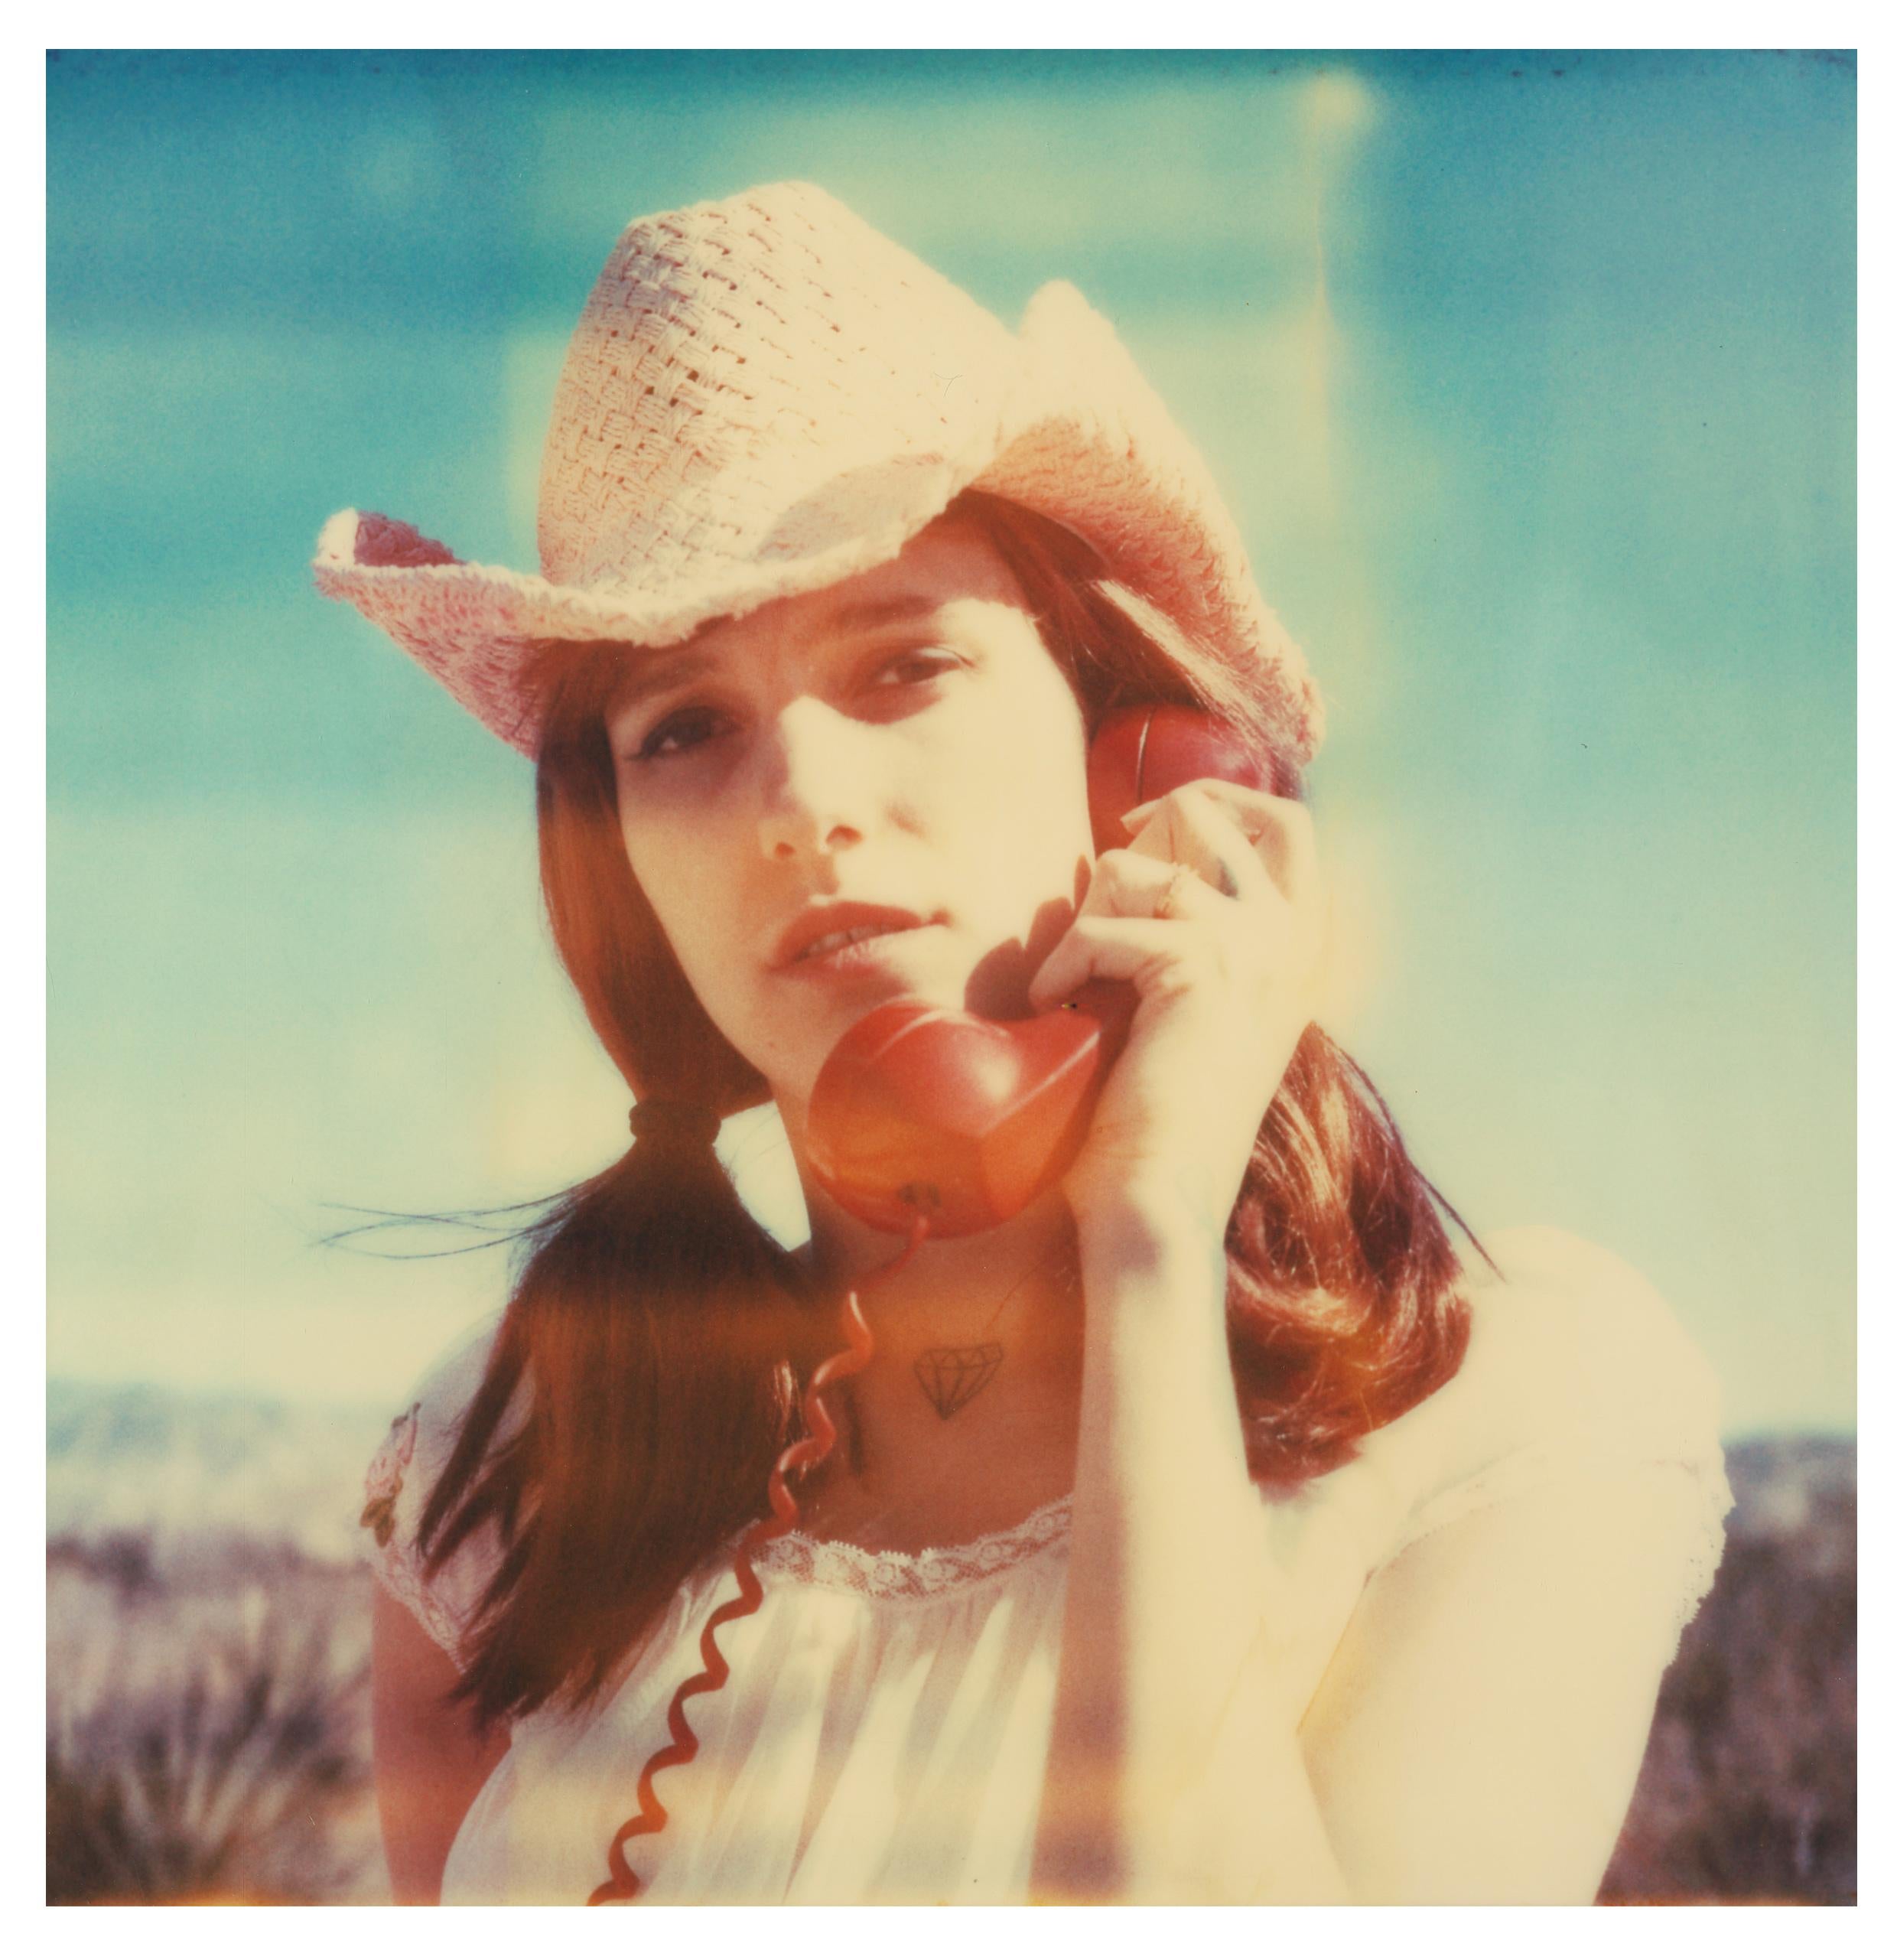 Her last Call (The Girl behind the White Picket Fence) - Polaroid, 21st Century